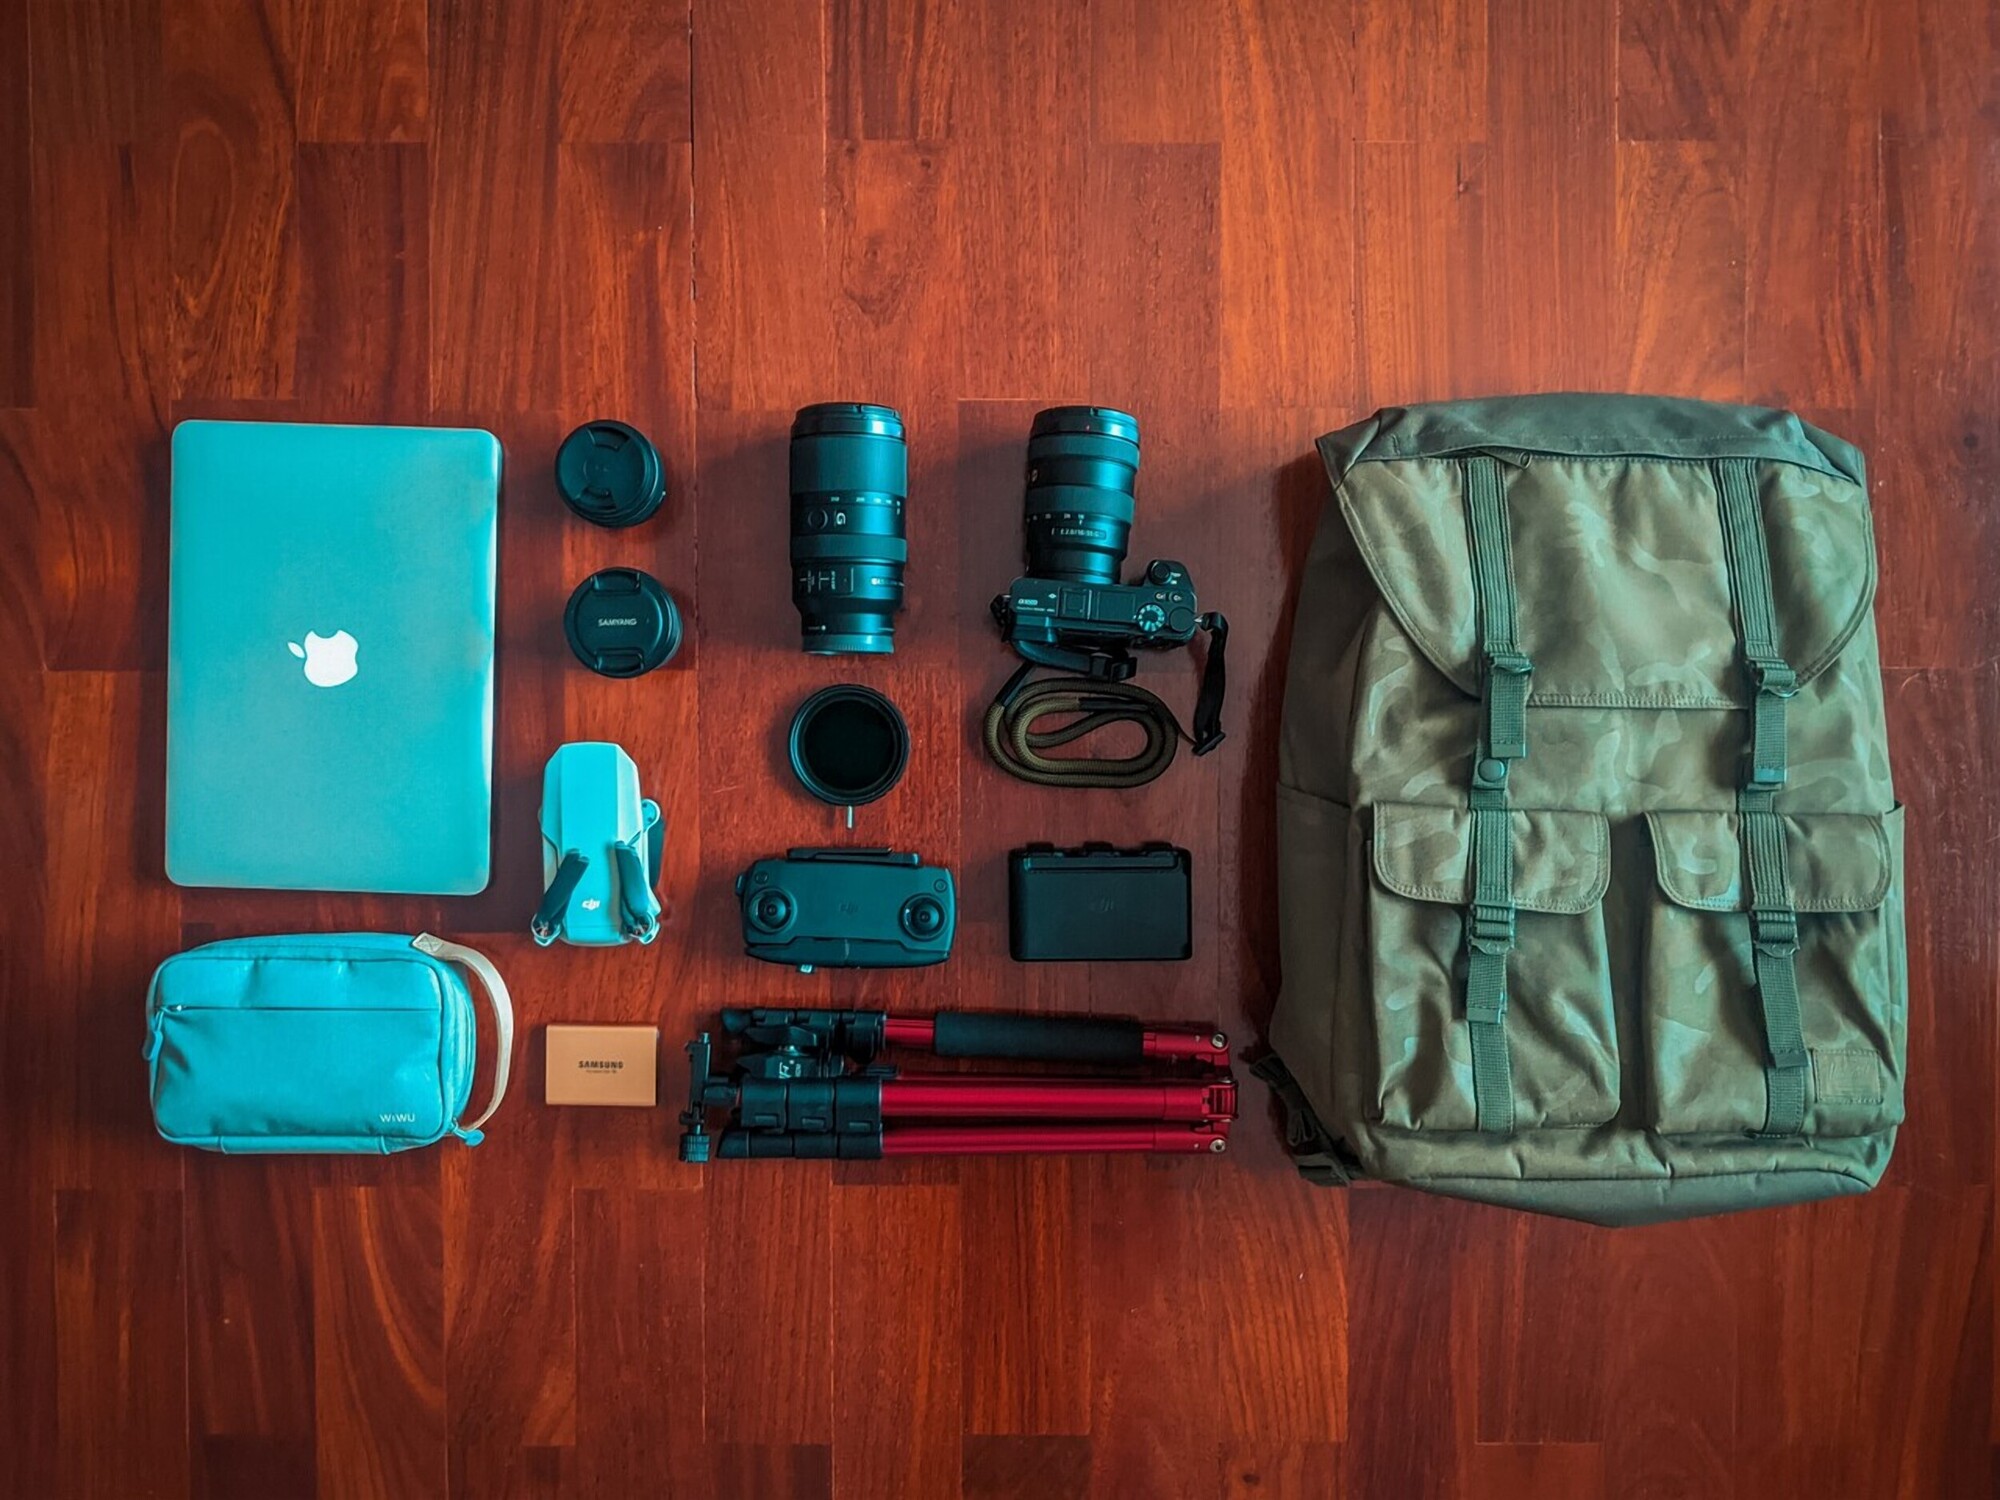 How to Travel the World With 1 Backpack, Travel Channel Blog: Roam